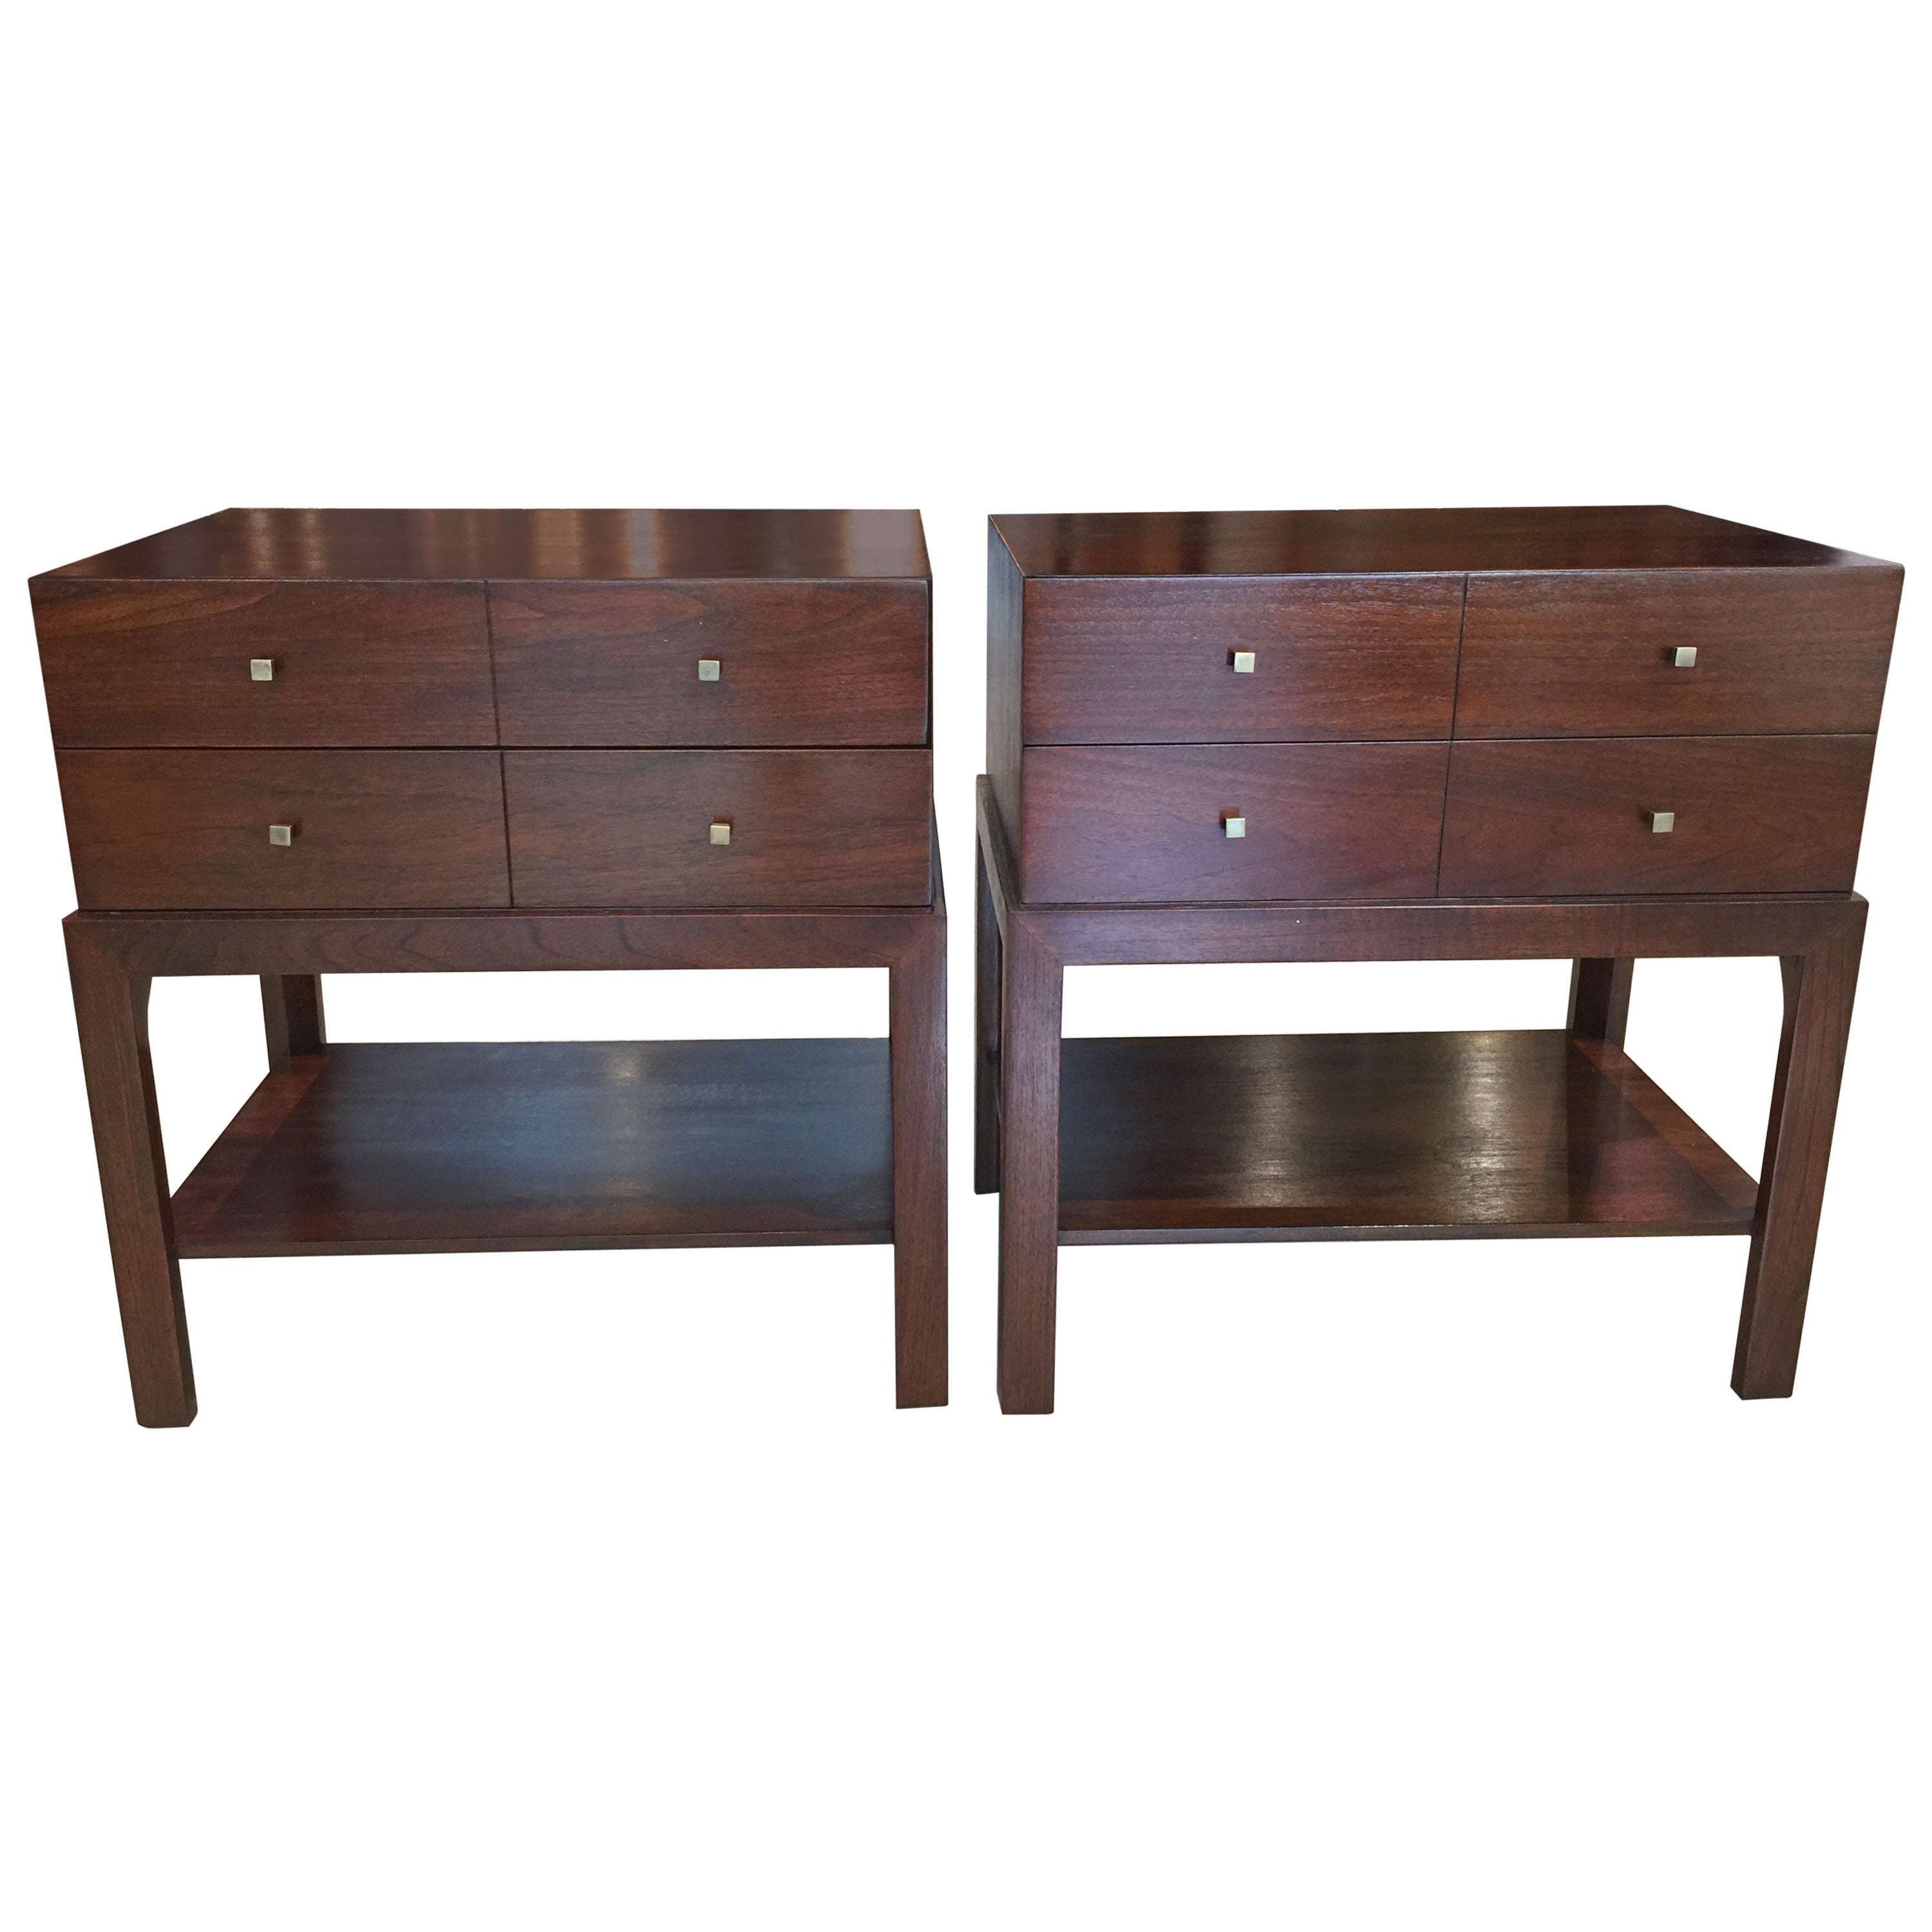 A pair of handsome Parzinger style nightstands by Albert Furniture Company. Rich mahogany and brass knobs.